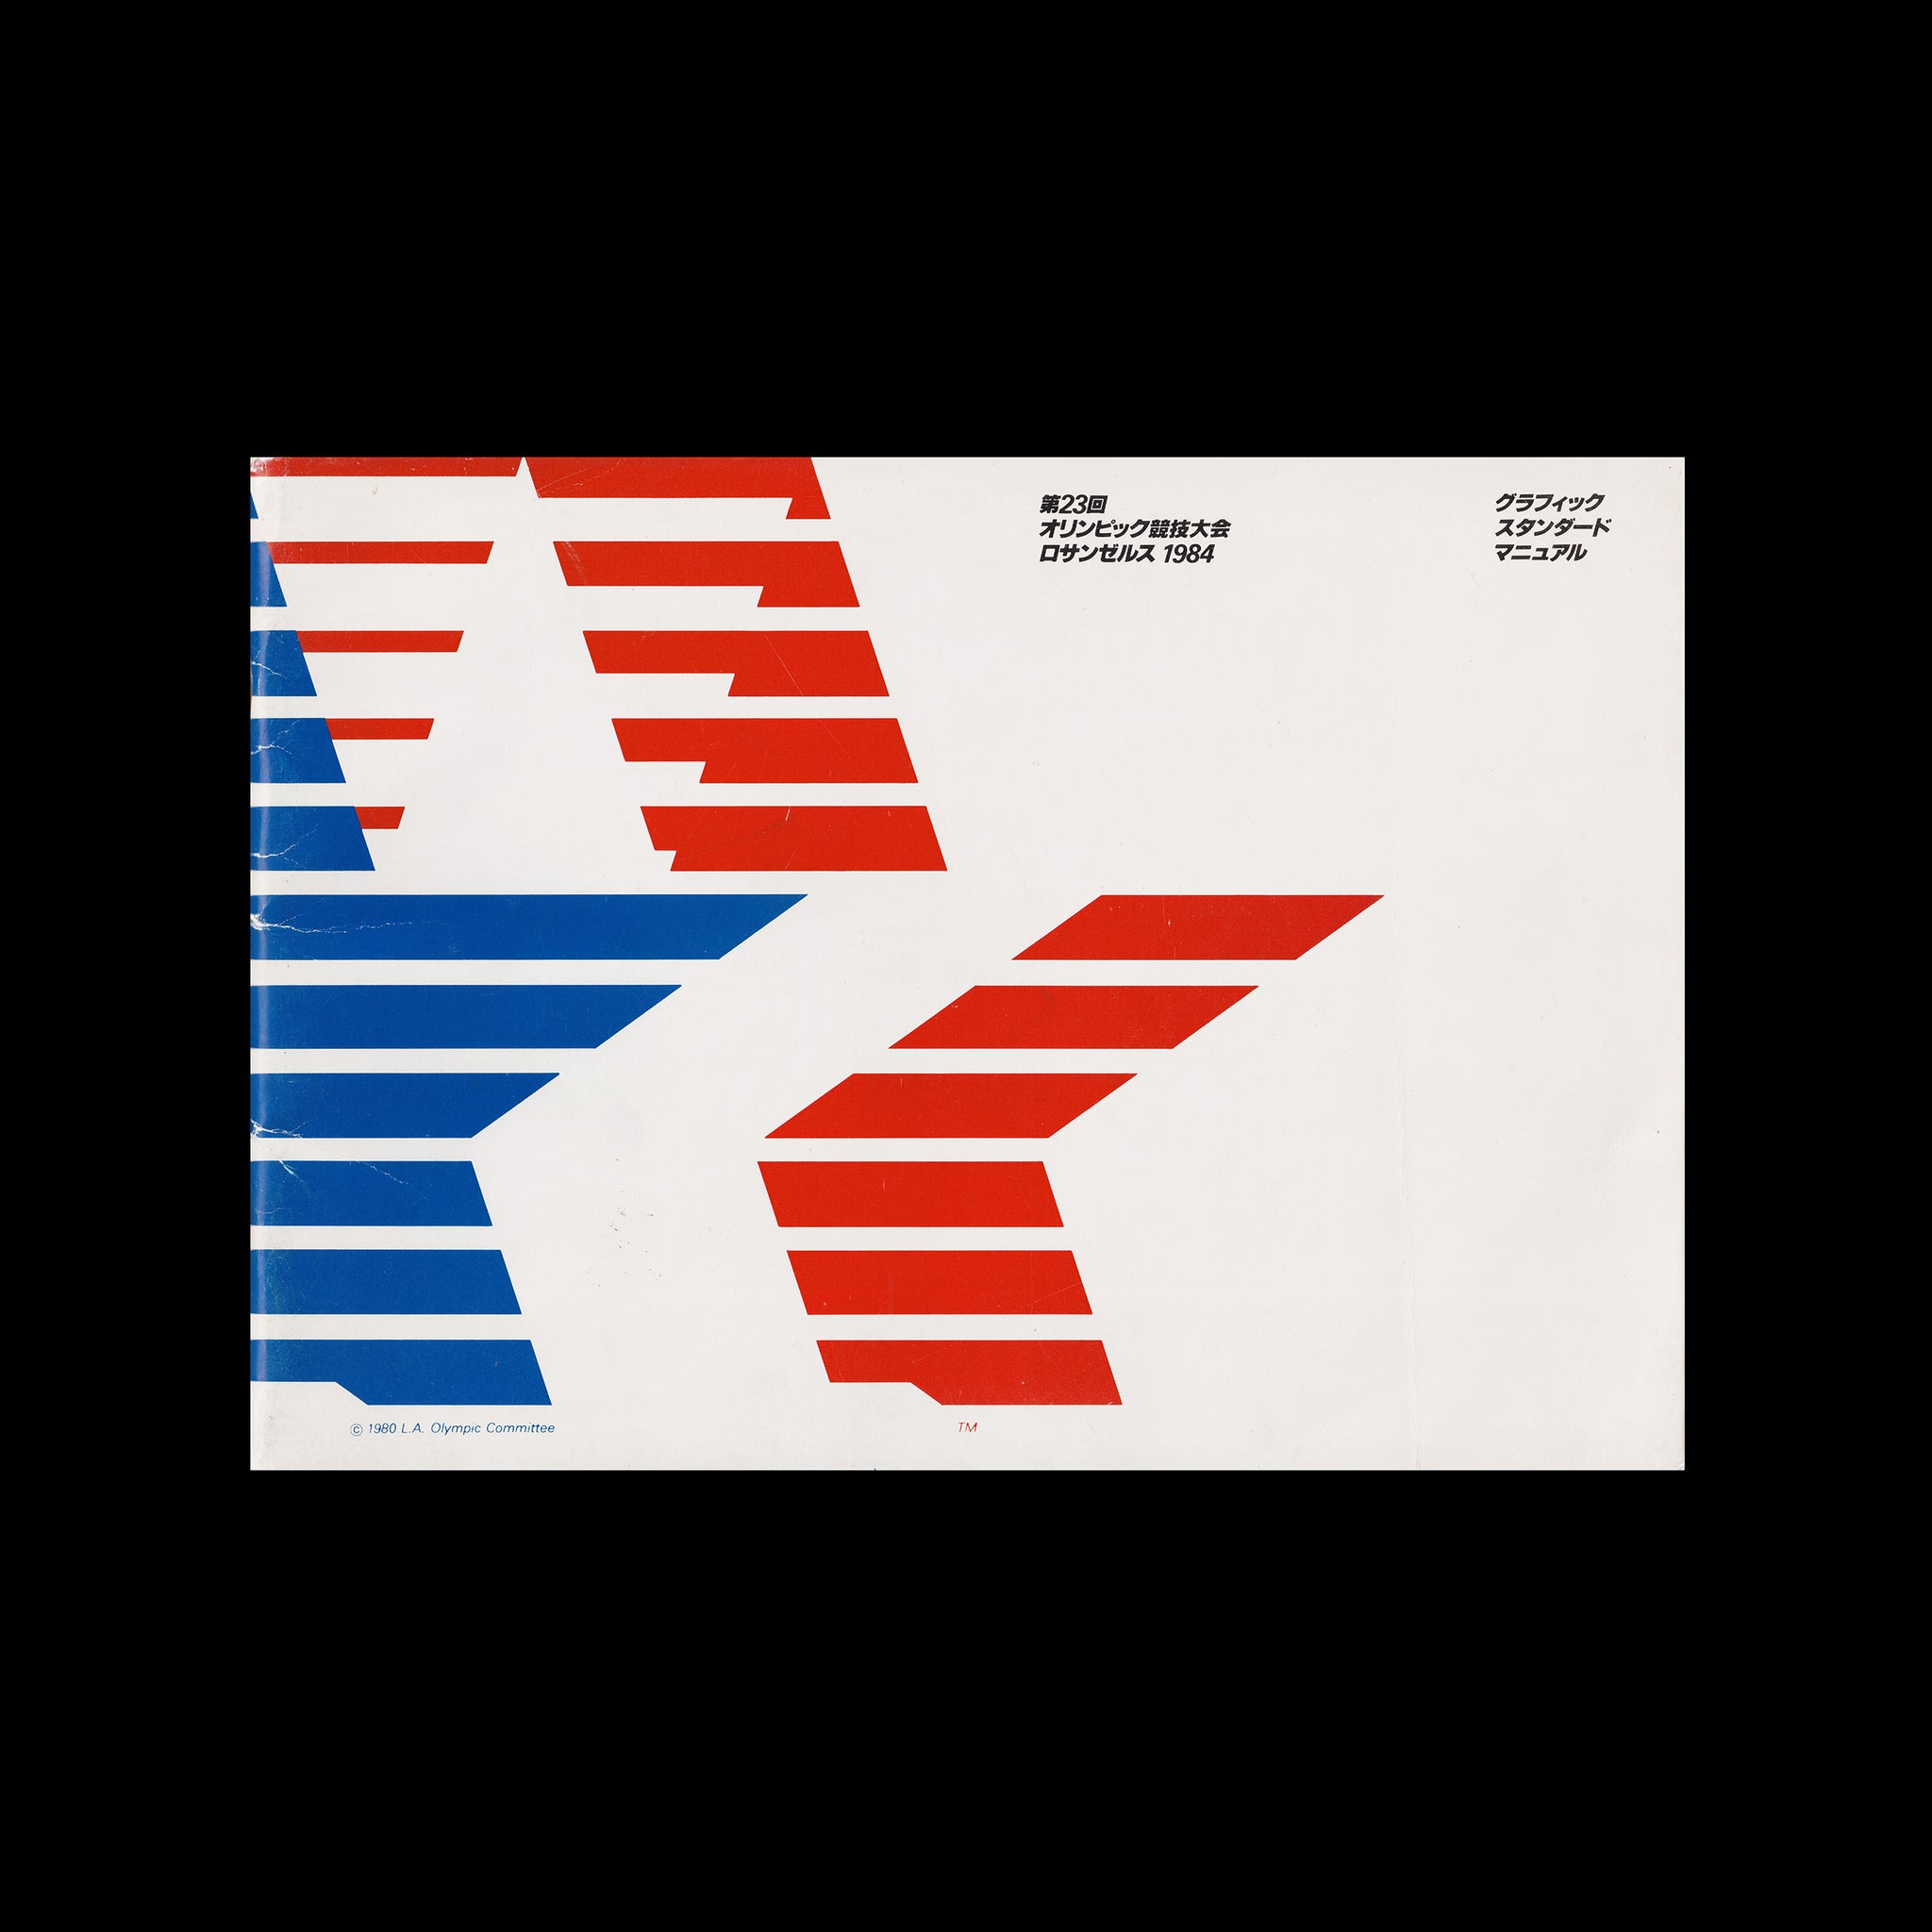 L.A. Summer Olympics 1984, Brand Guidelines